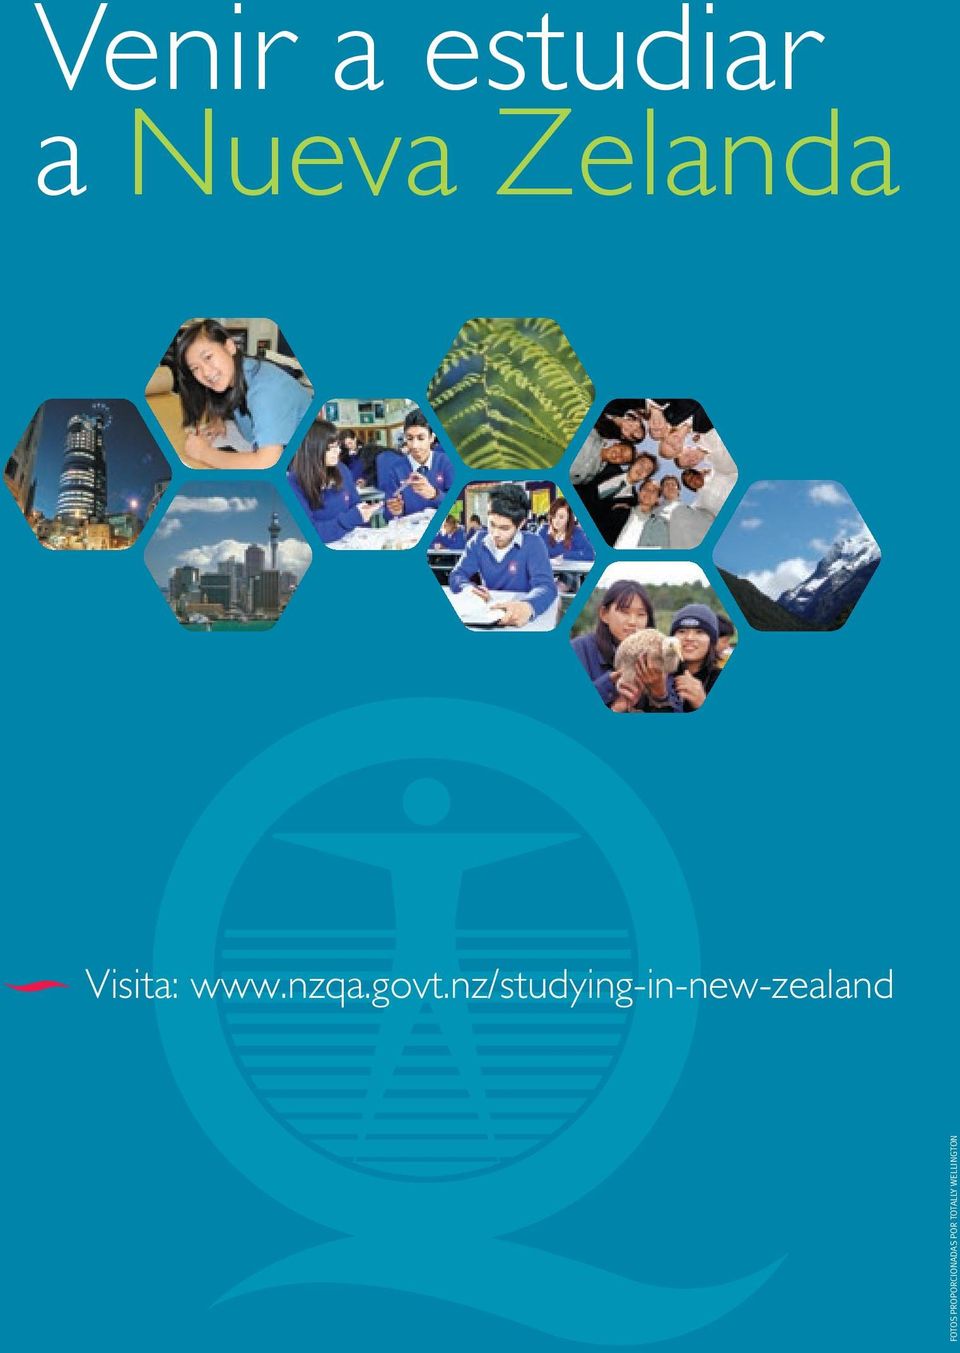 nz/studying-in-new-zealand